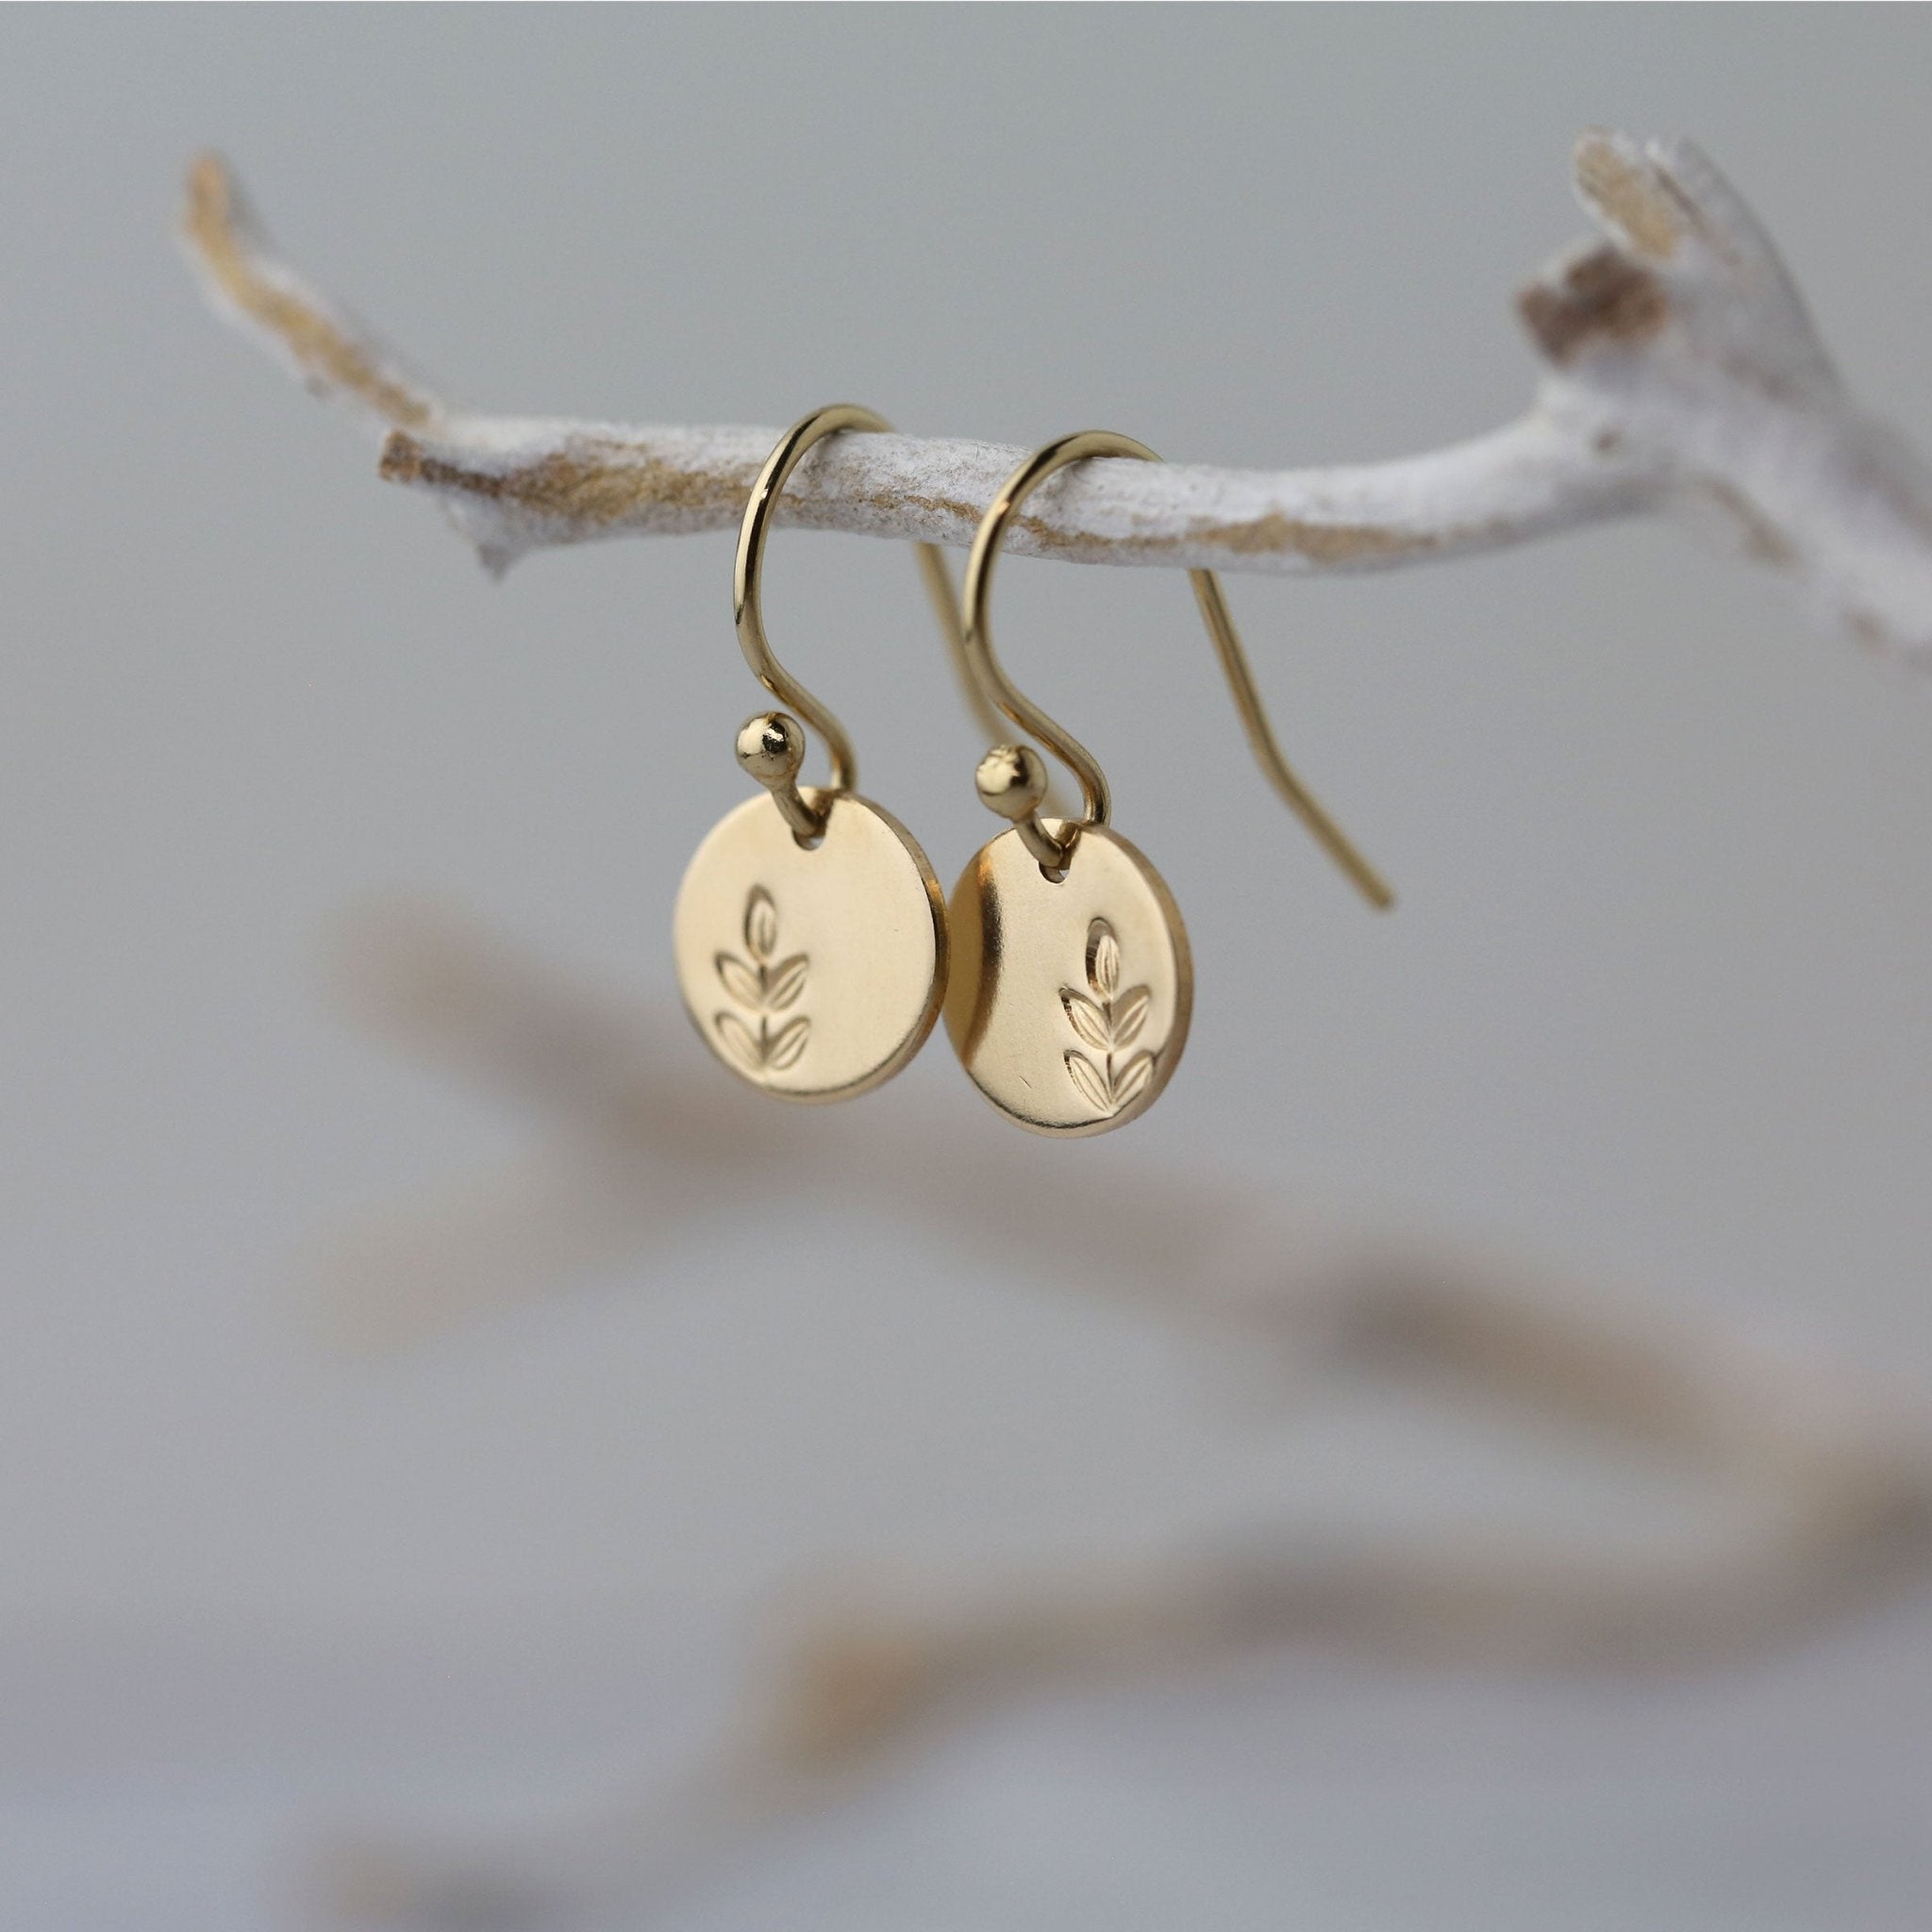 Tiny Gold Stamped Leaf Earrings